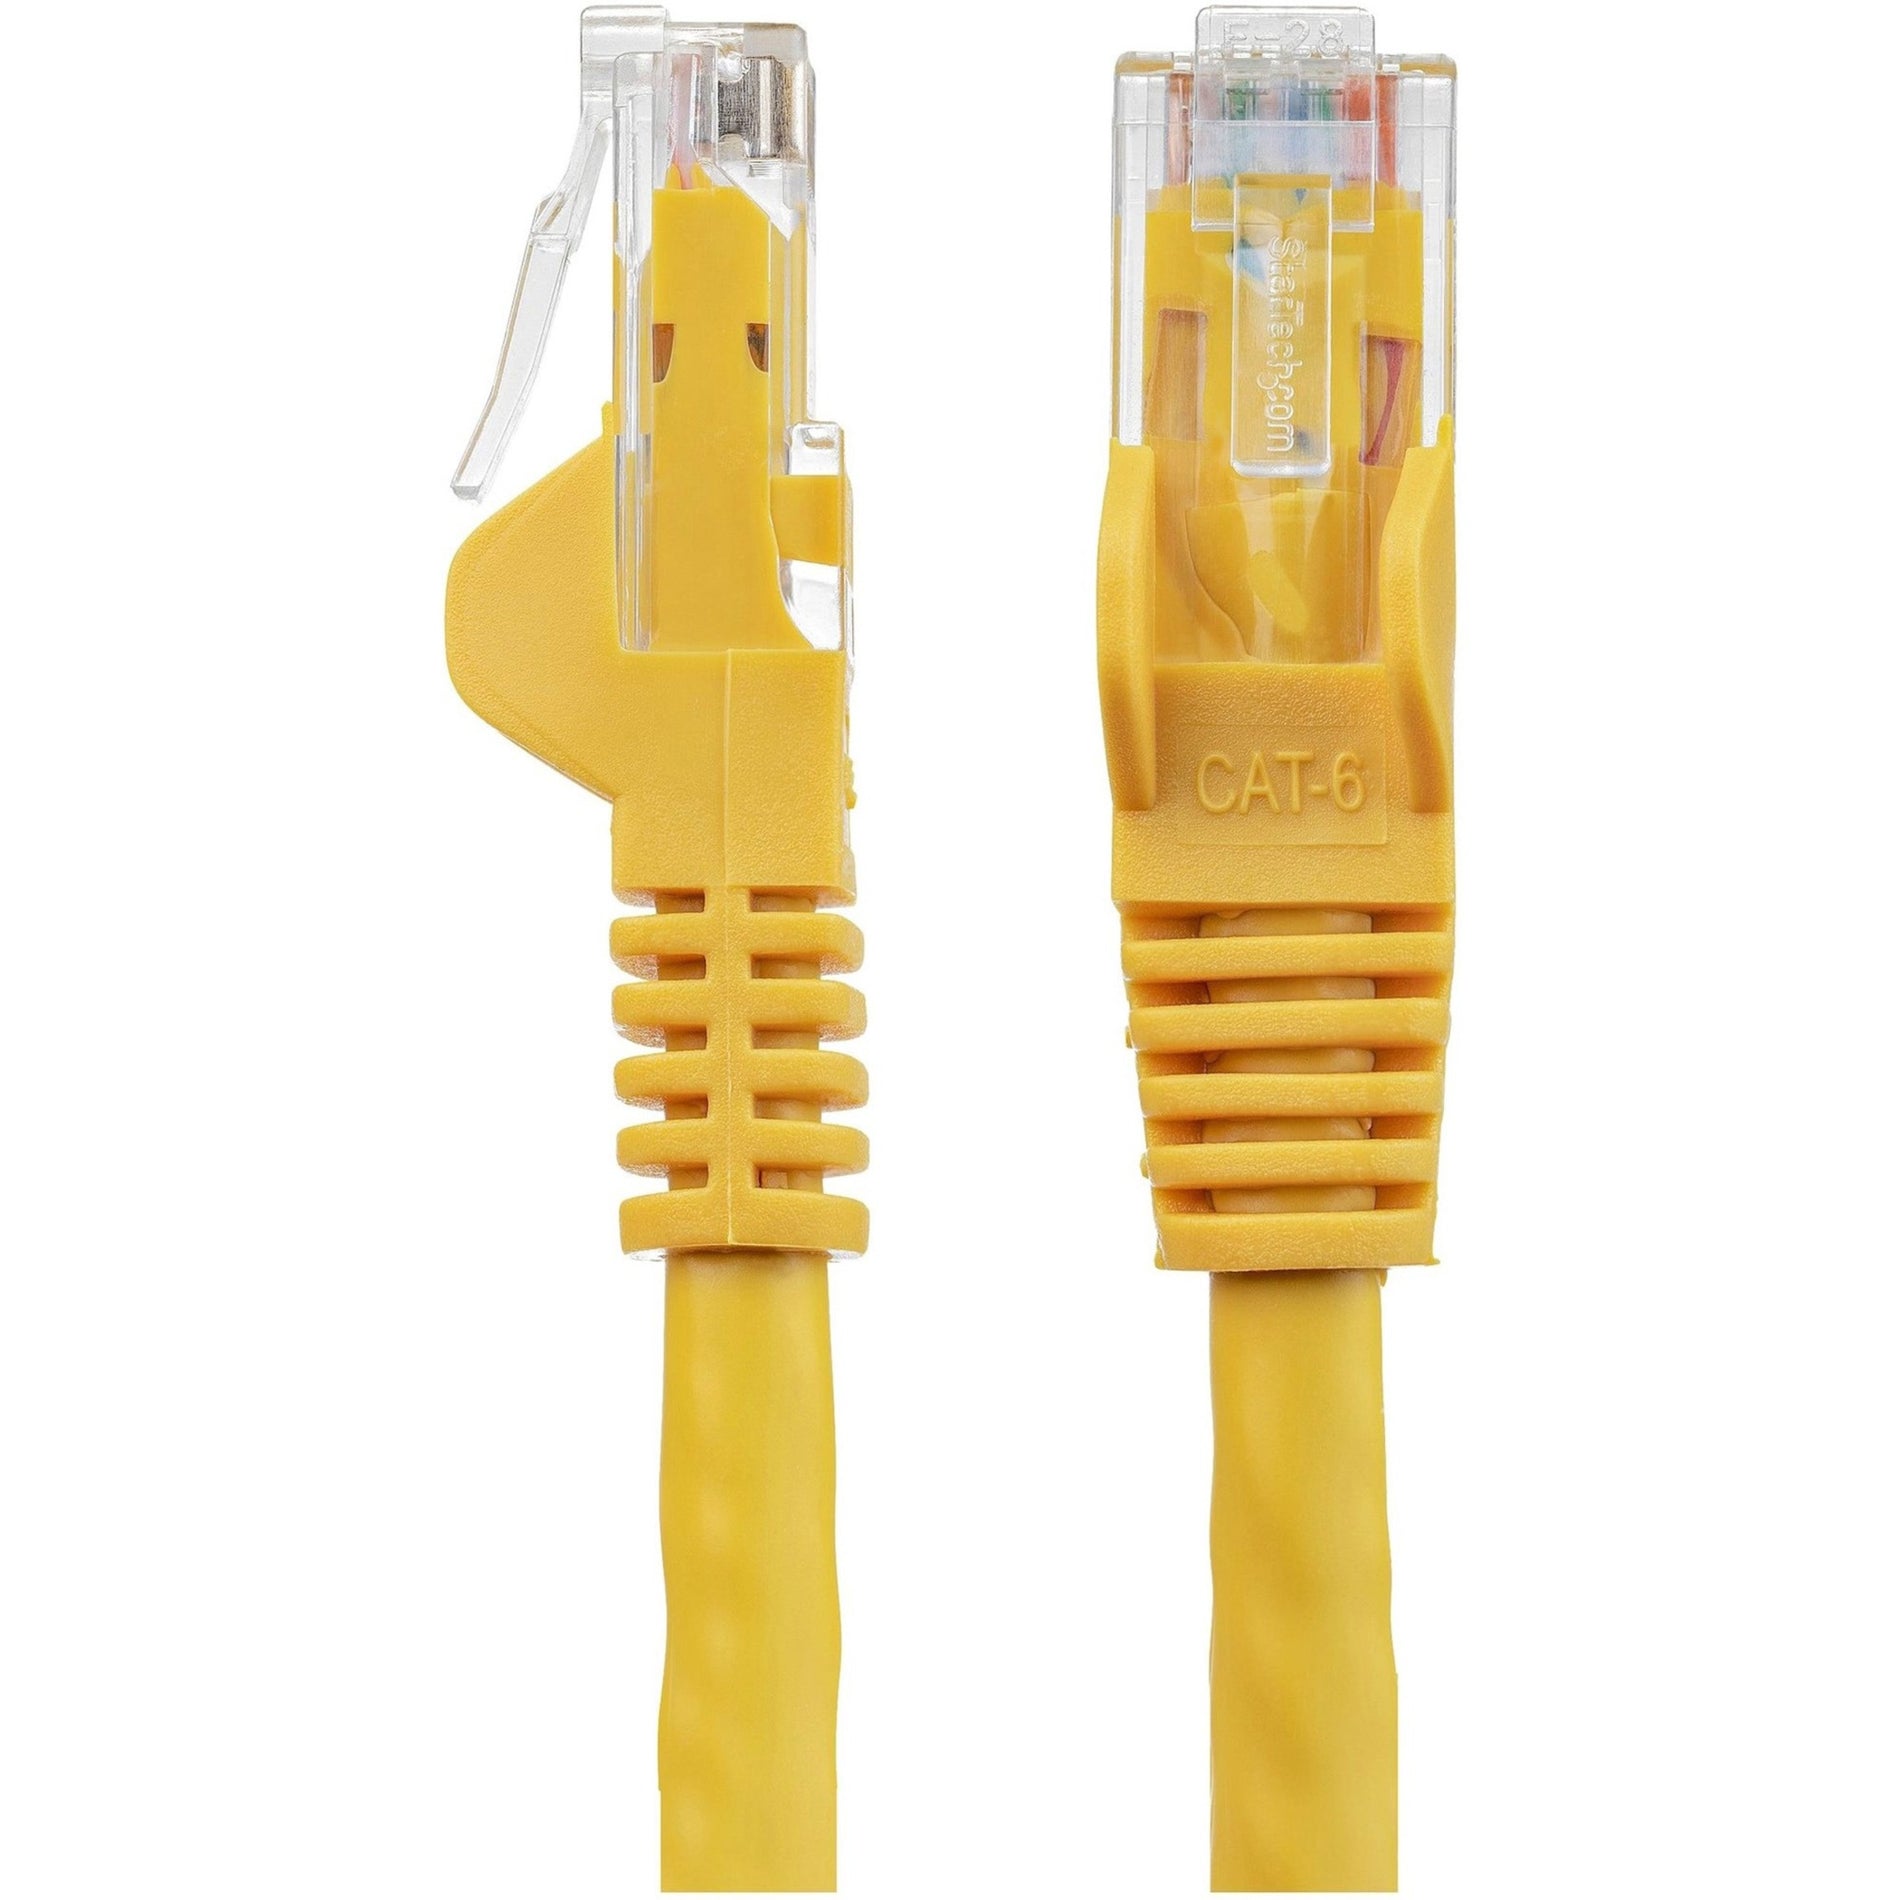 StarTech.com N6PATCH2YL Cat6 Network Cable, 2ft Yellow Ethernet Cable, Snagless RJ45 Connectors